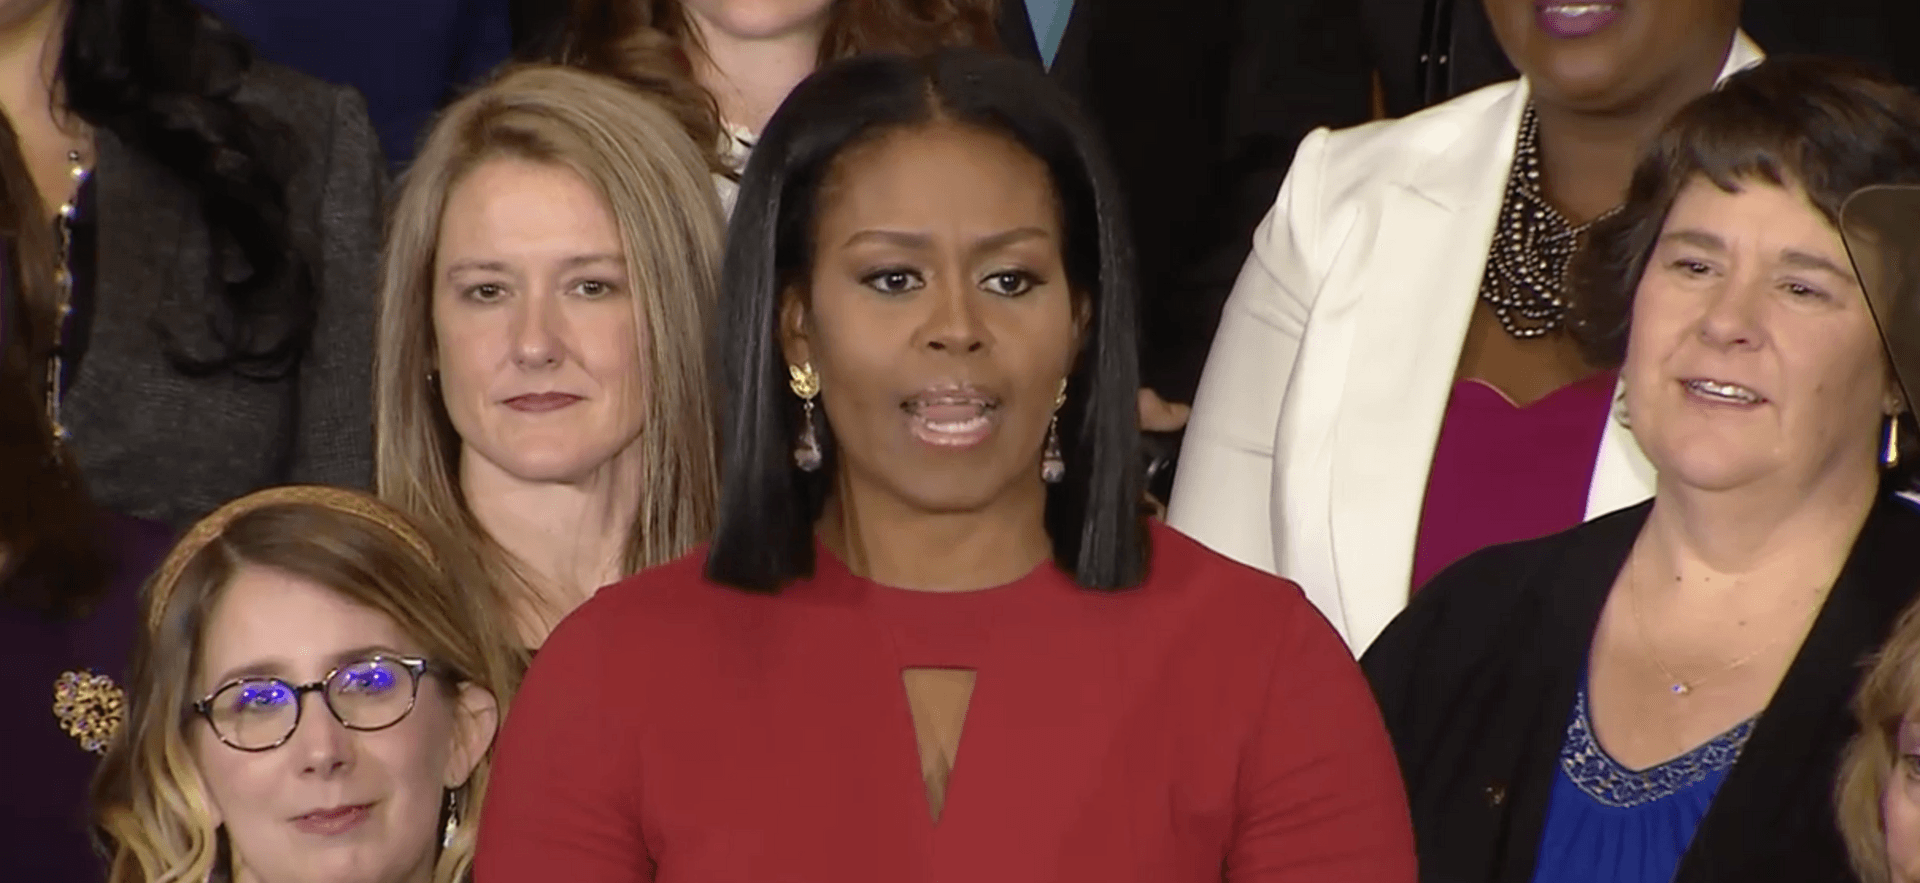 Michelle Obama giving what will be her last address as first lady.